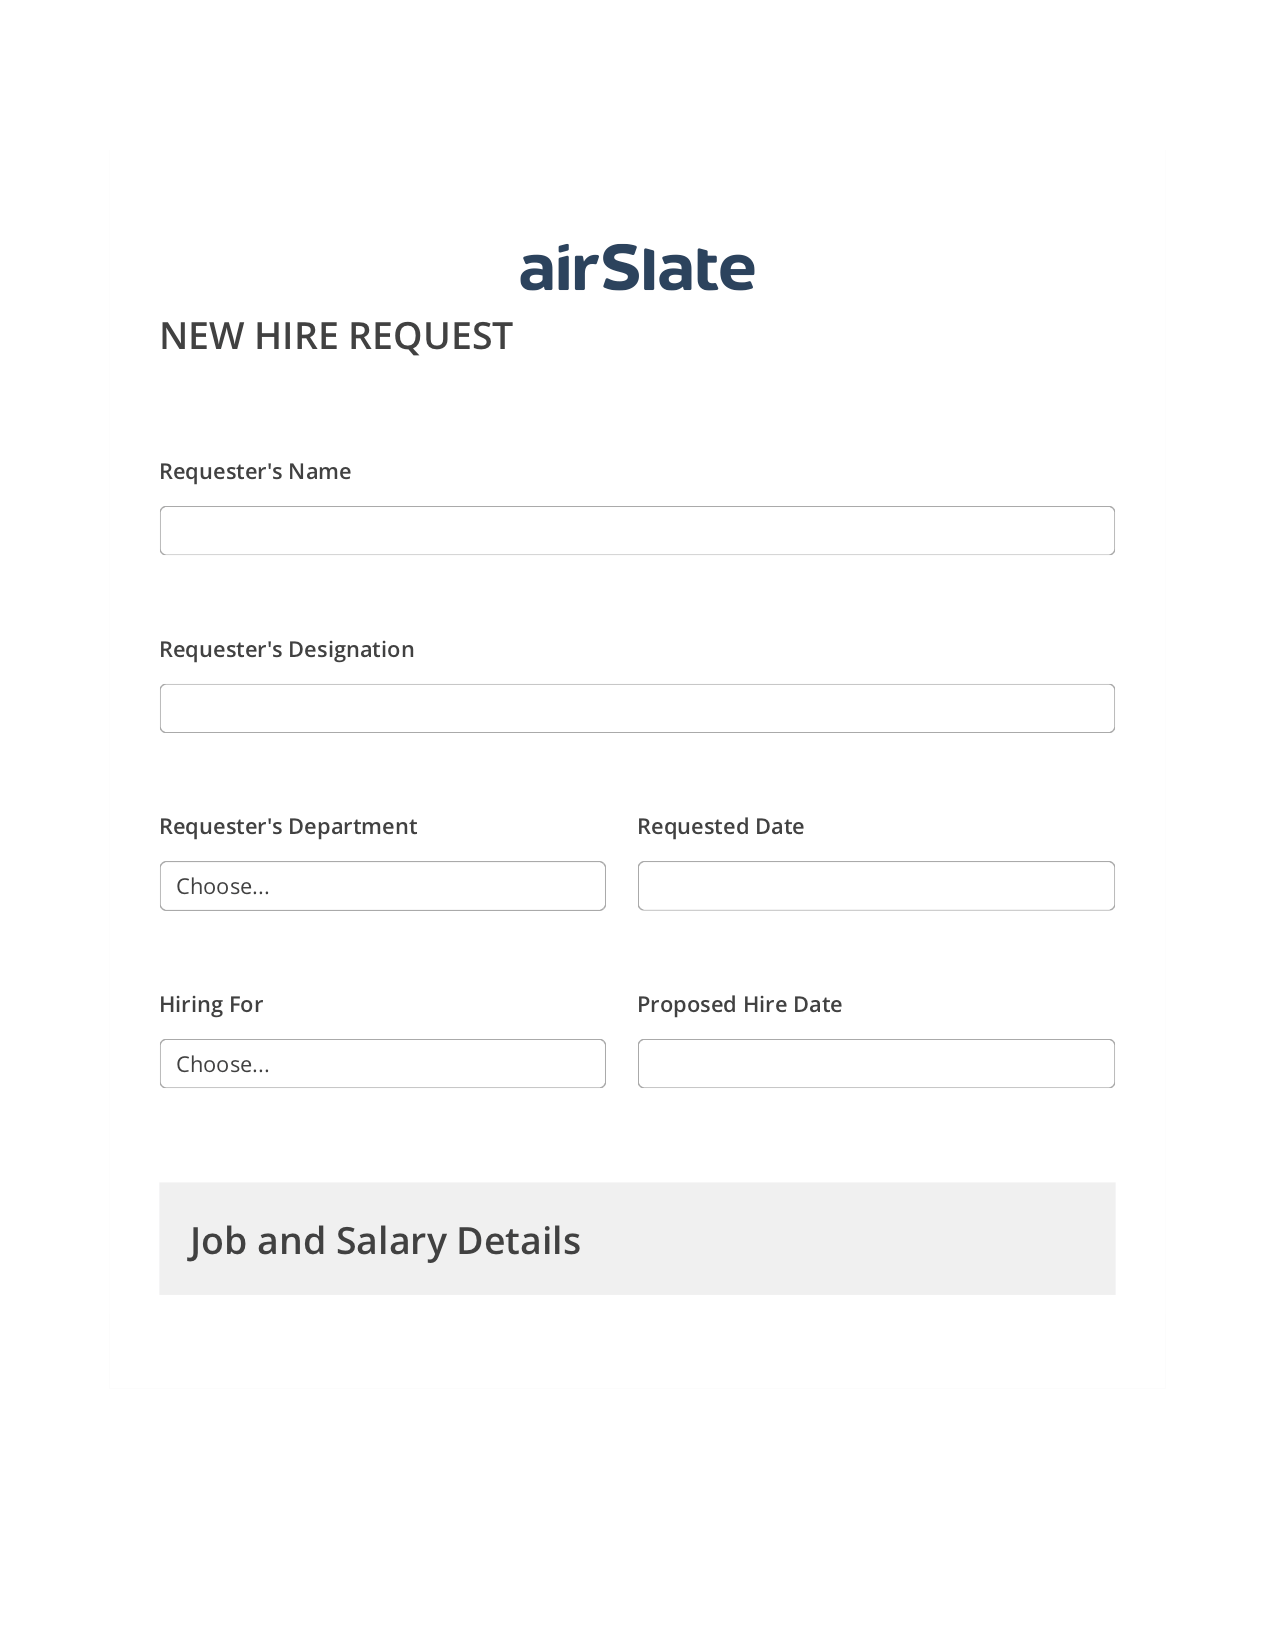 Hiring Request Workflow Pre-fill from another Slate Bot, Remove Tags From Slate Bot, Export to NetSuite Bot